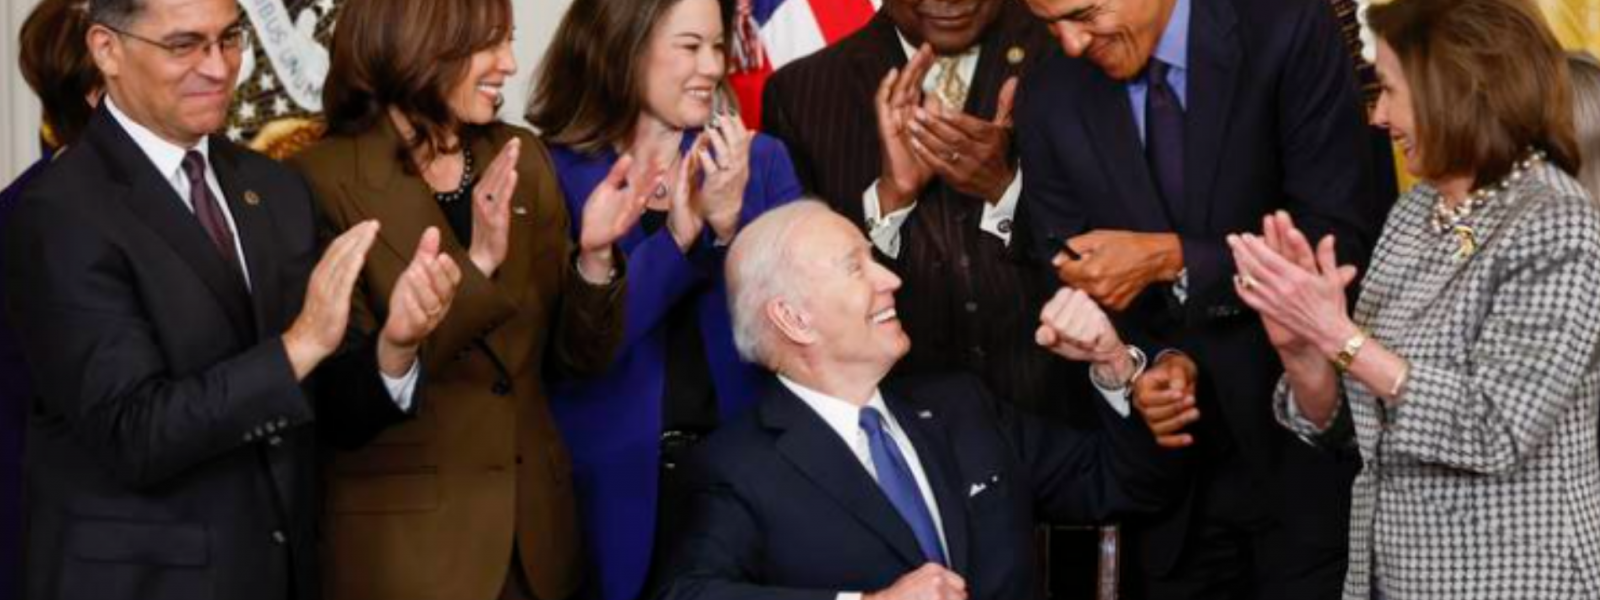 US President Biden seated while shaking President Obama's hand and other national leaders applaud in the background